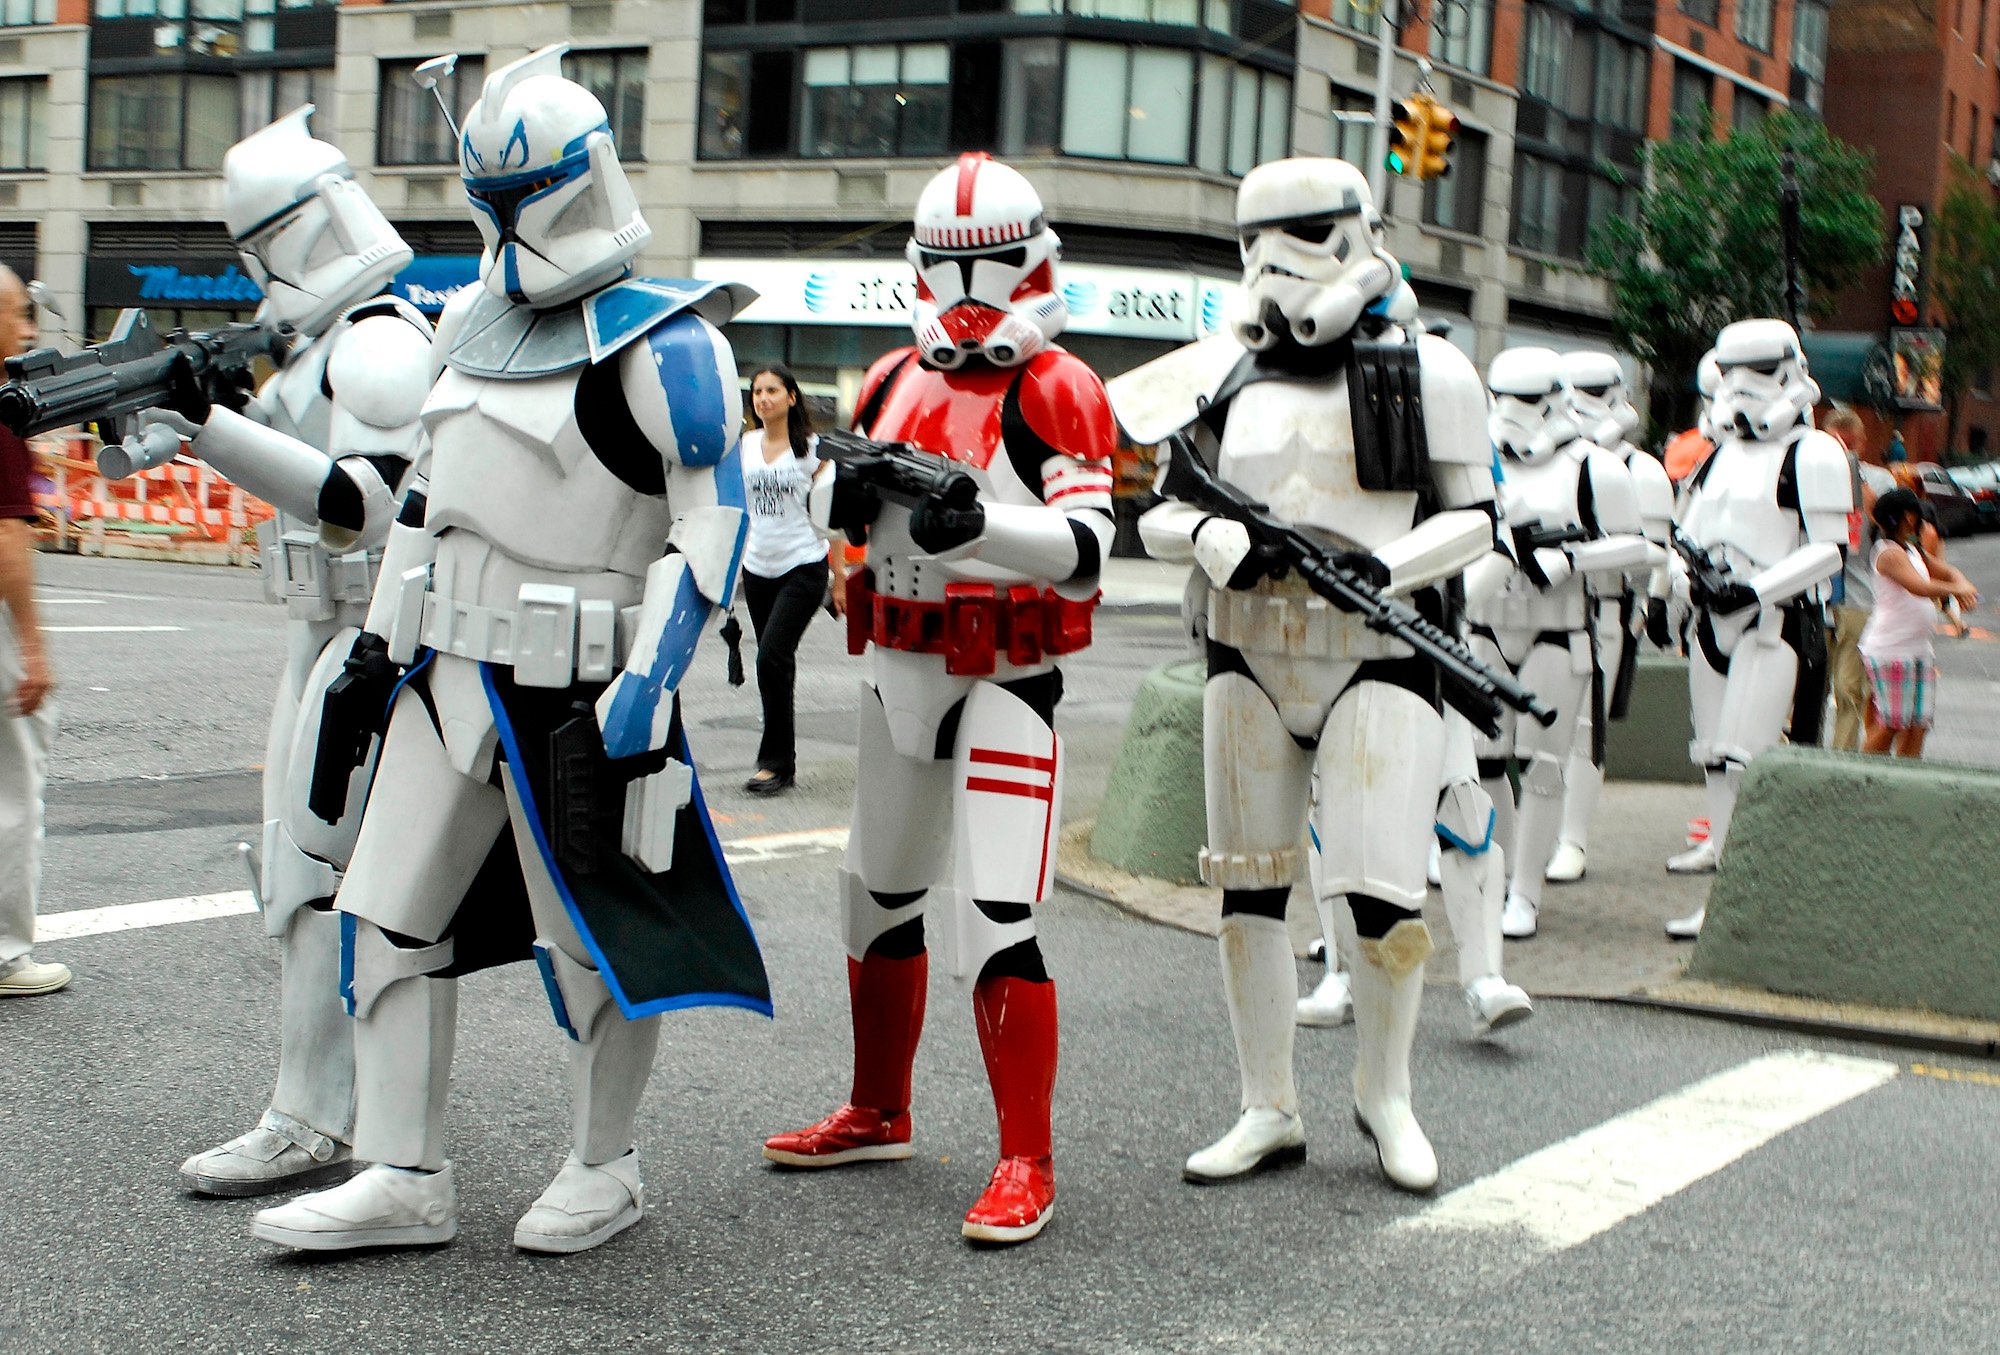 Actors portraying Stormtroopers and Clone Troopers attend the New York International Children's Film Festival 